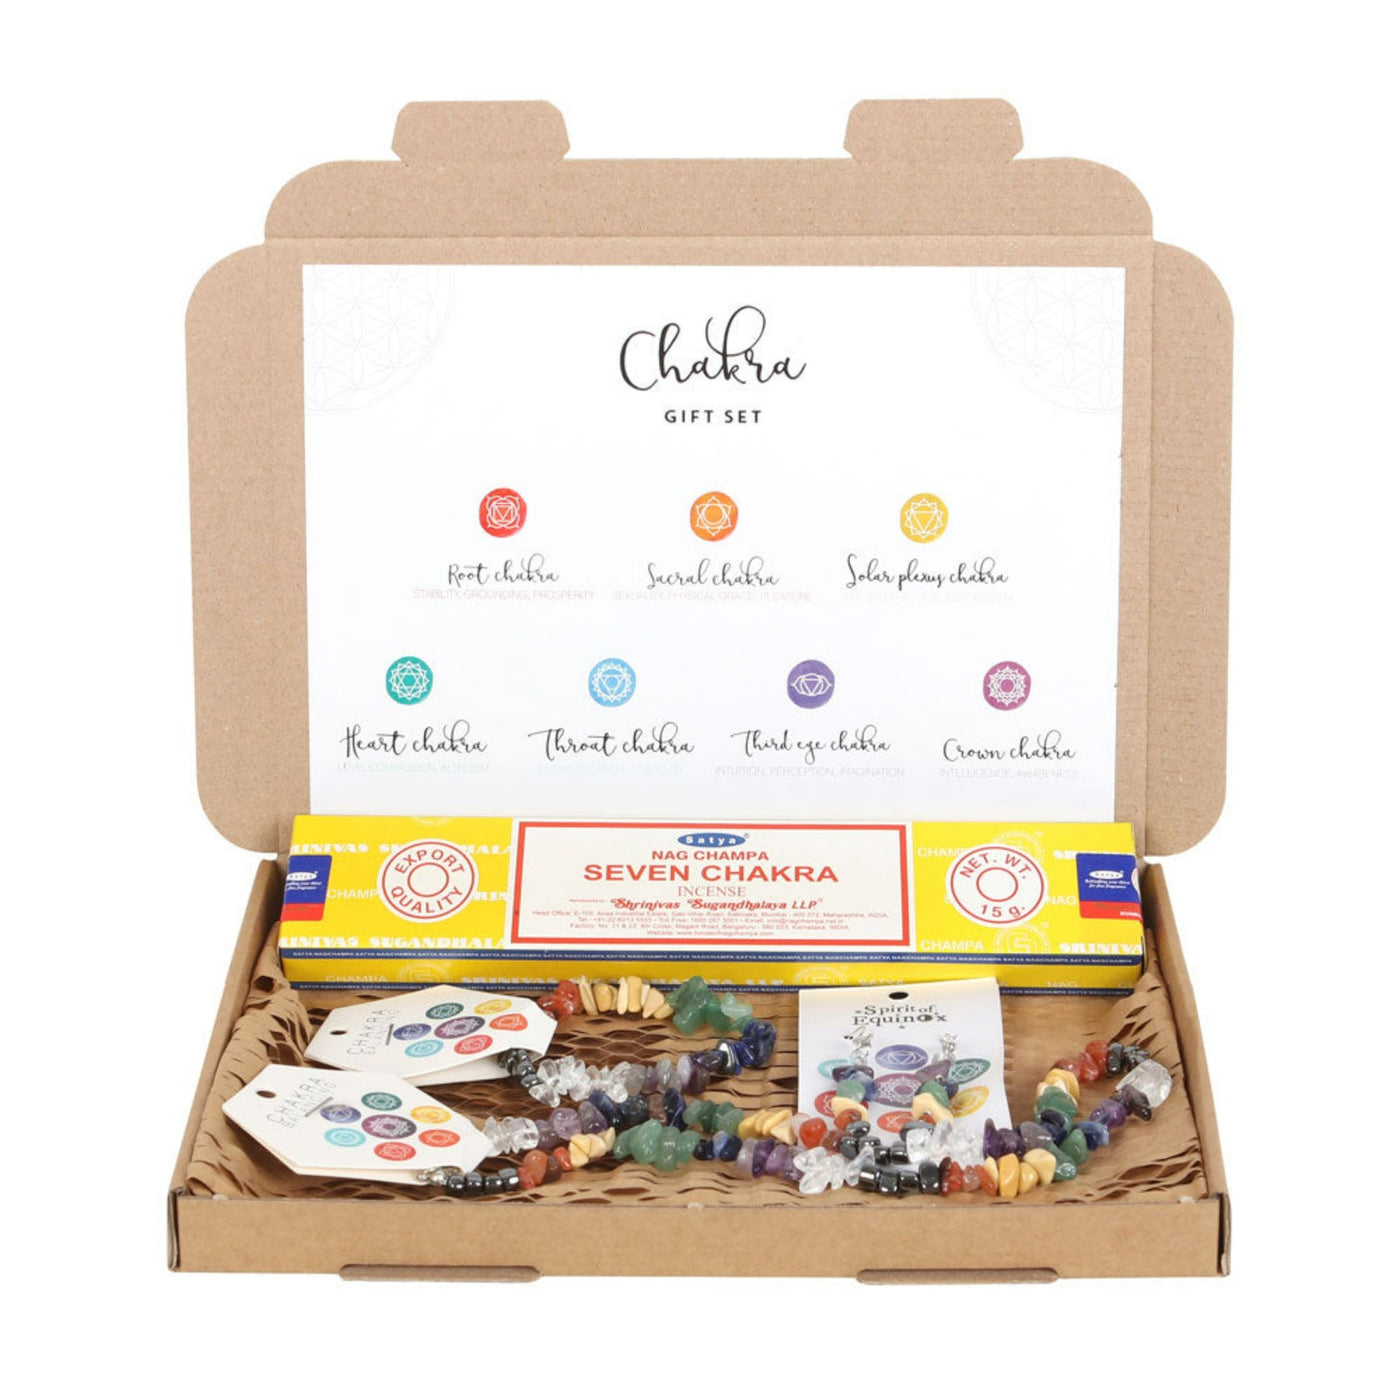 Chakra Crystal Chip Jewellery Boxed Gift Set With Bracelet, Earrings And Necklace